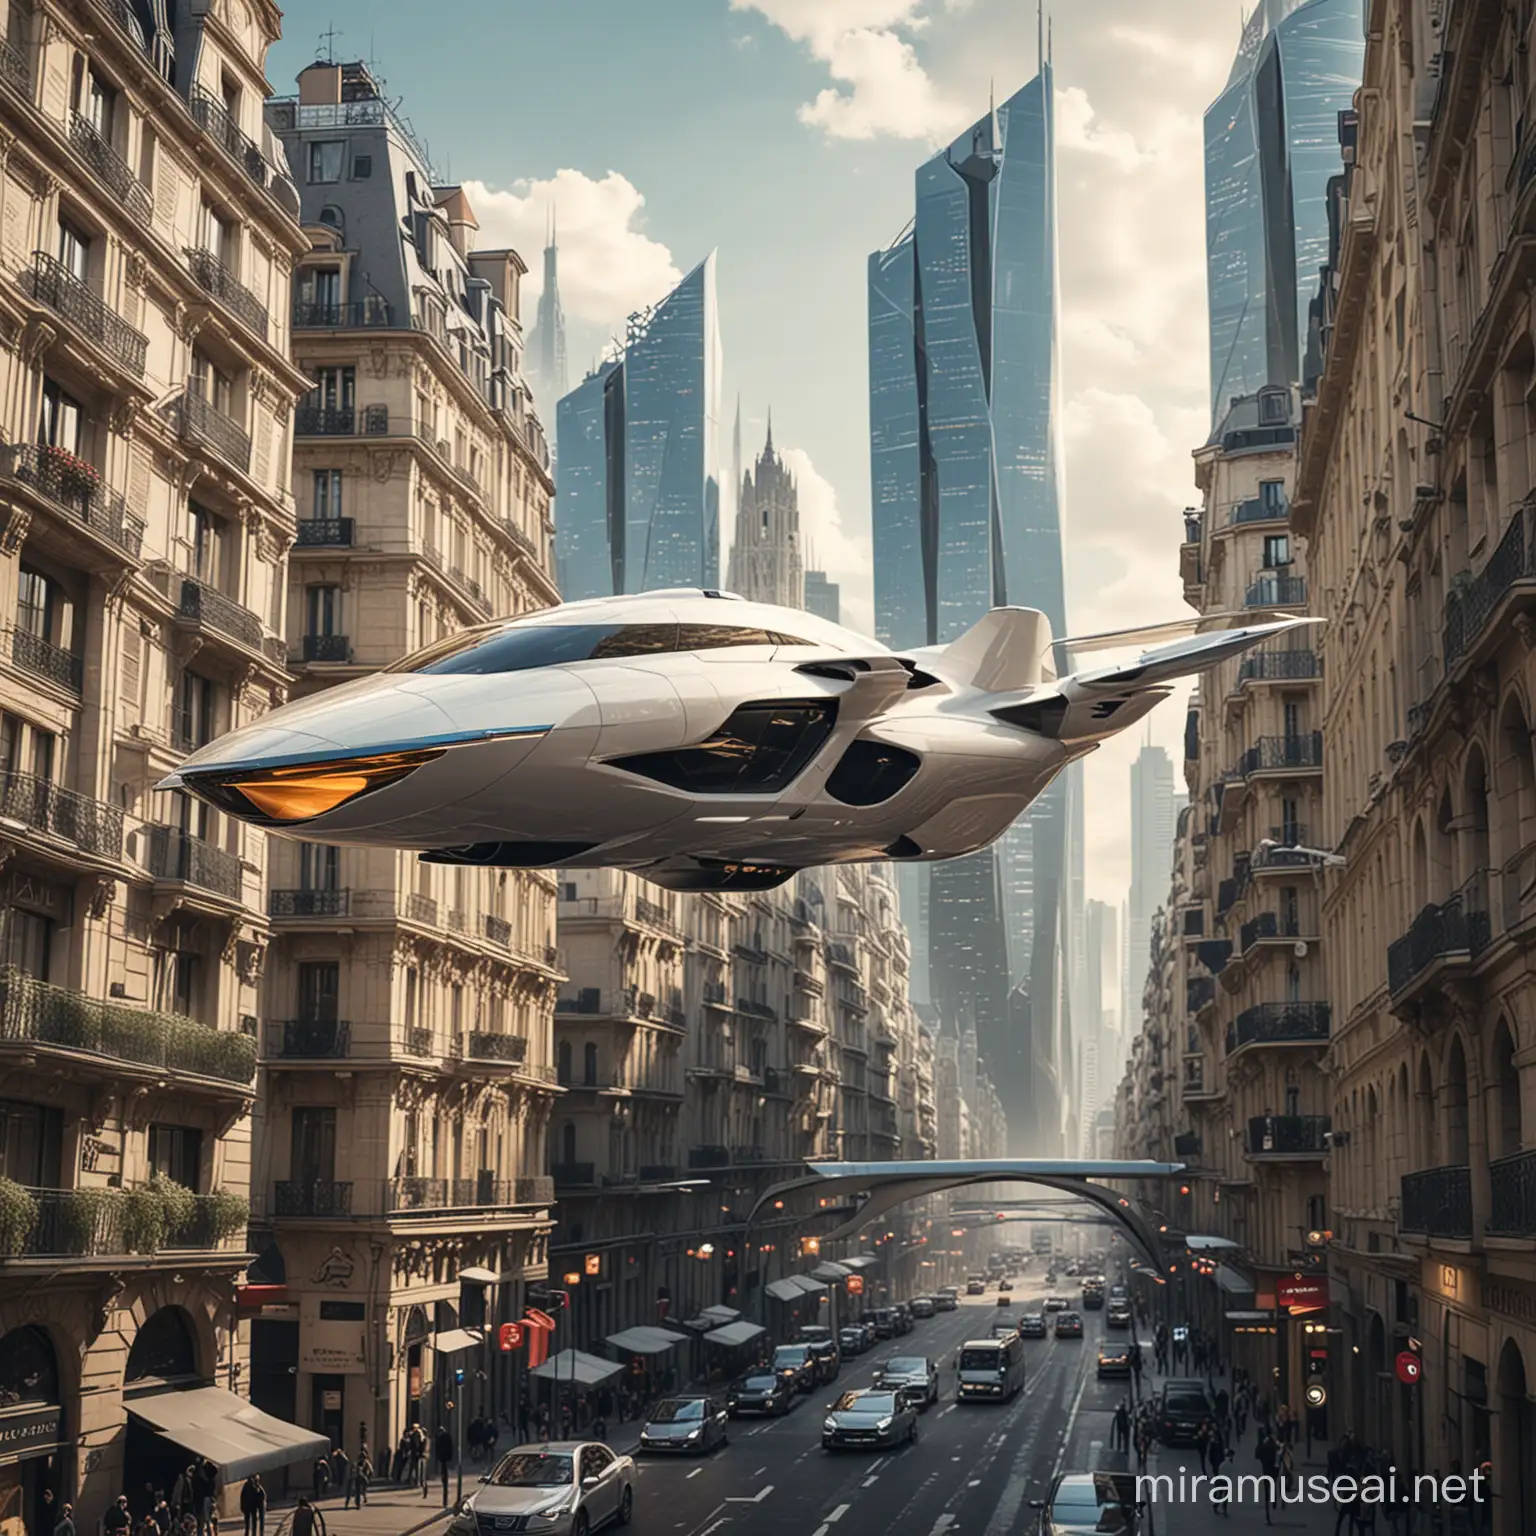 A luxury french vehicle flying in the city of a futuristic city